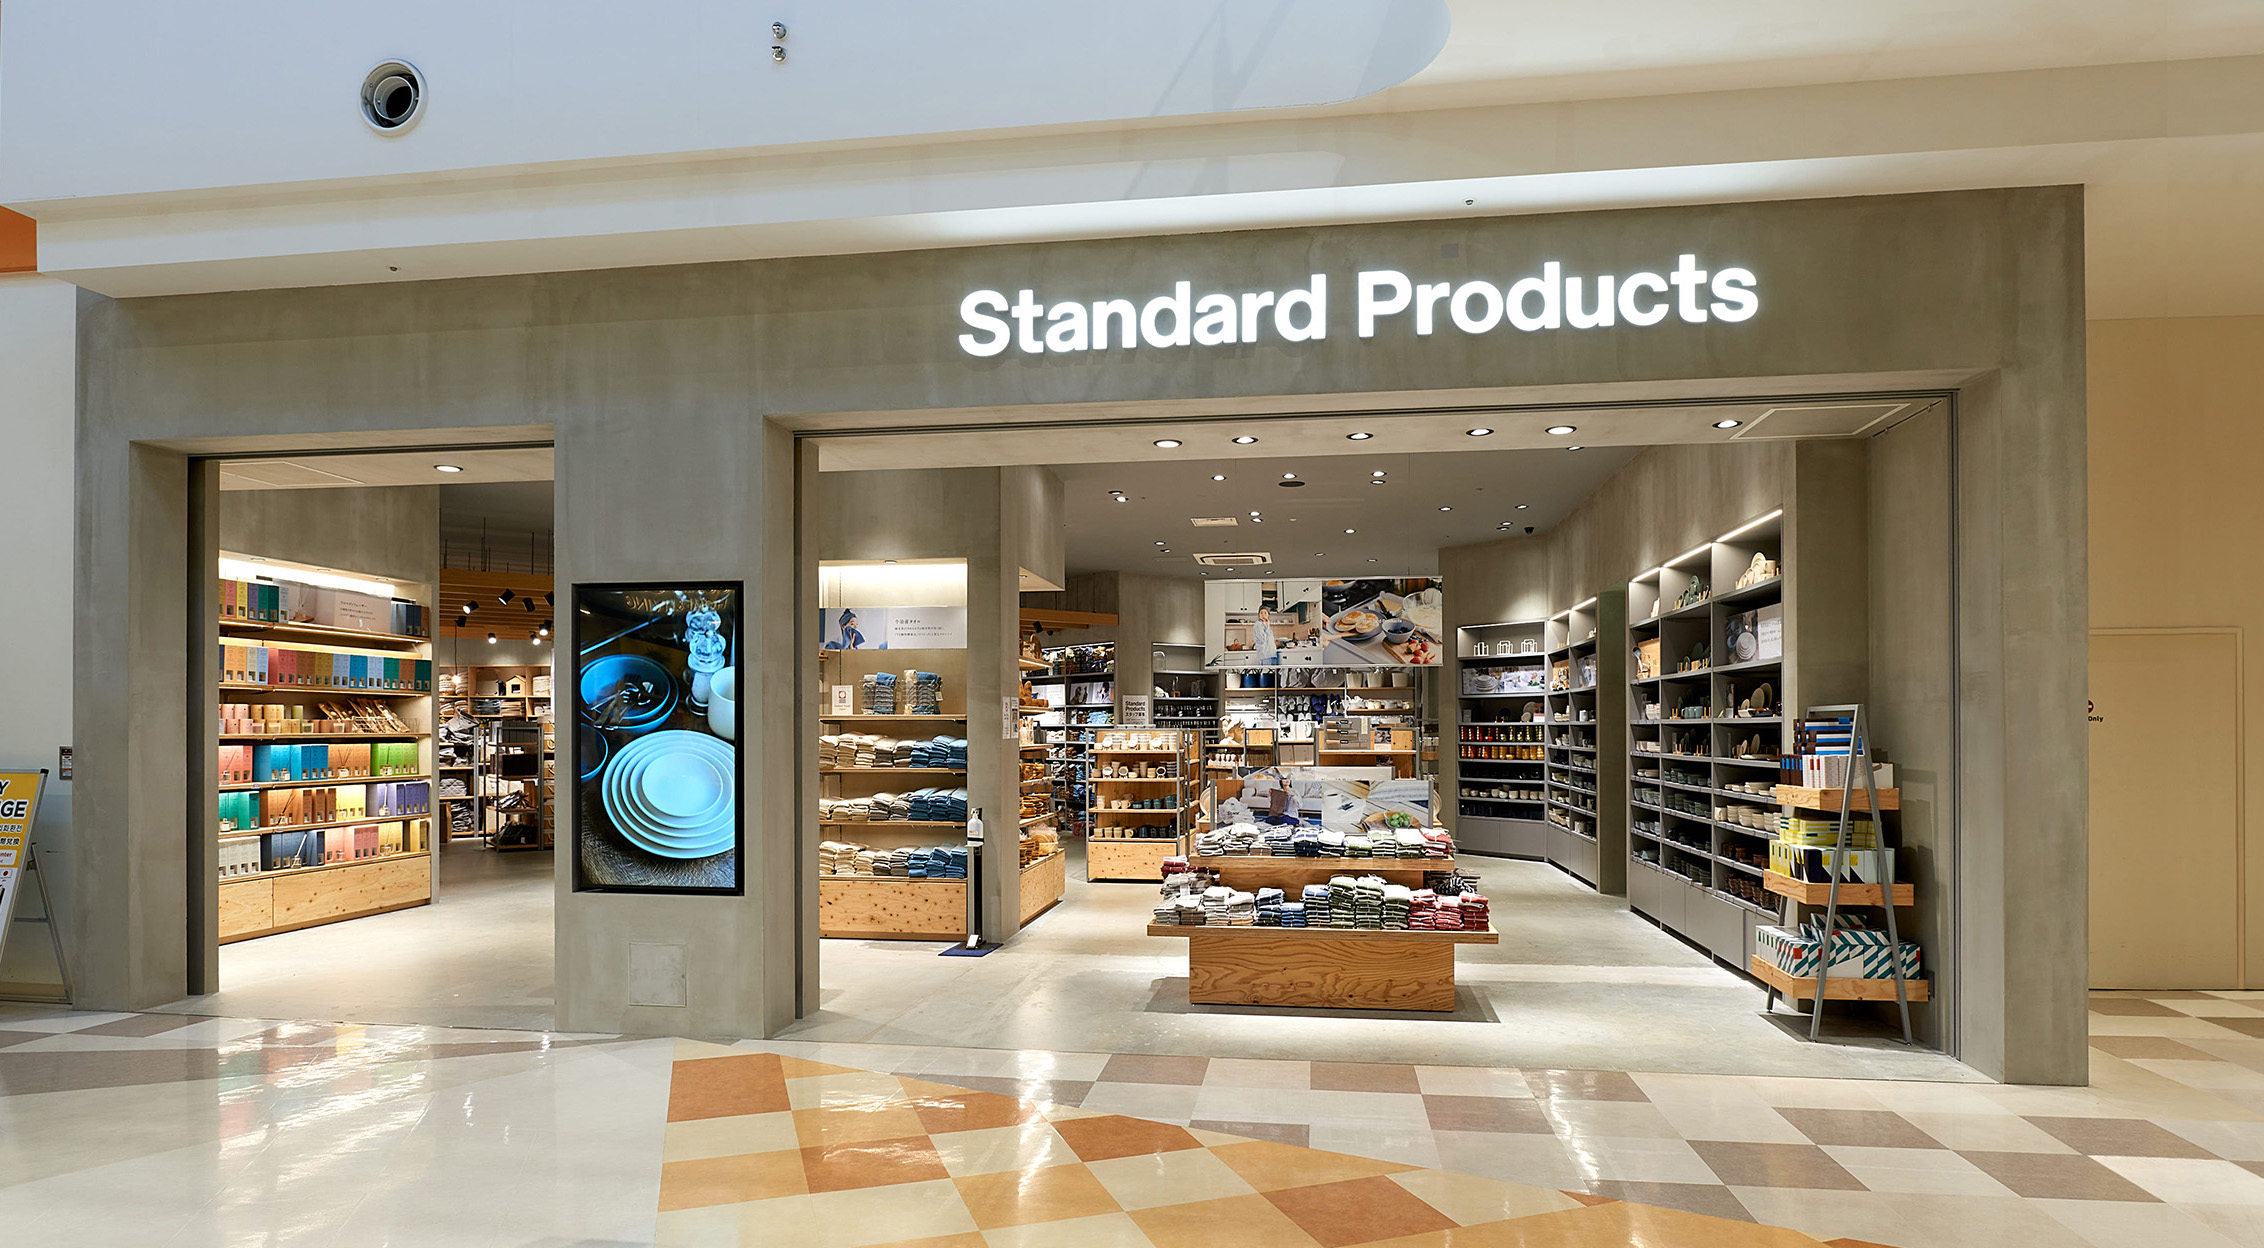 Standard Products ららぽーとEXPOCITY店